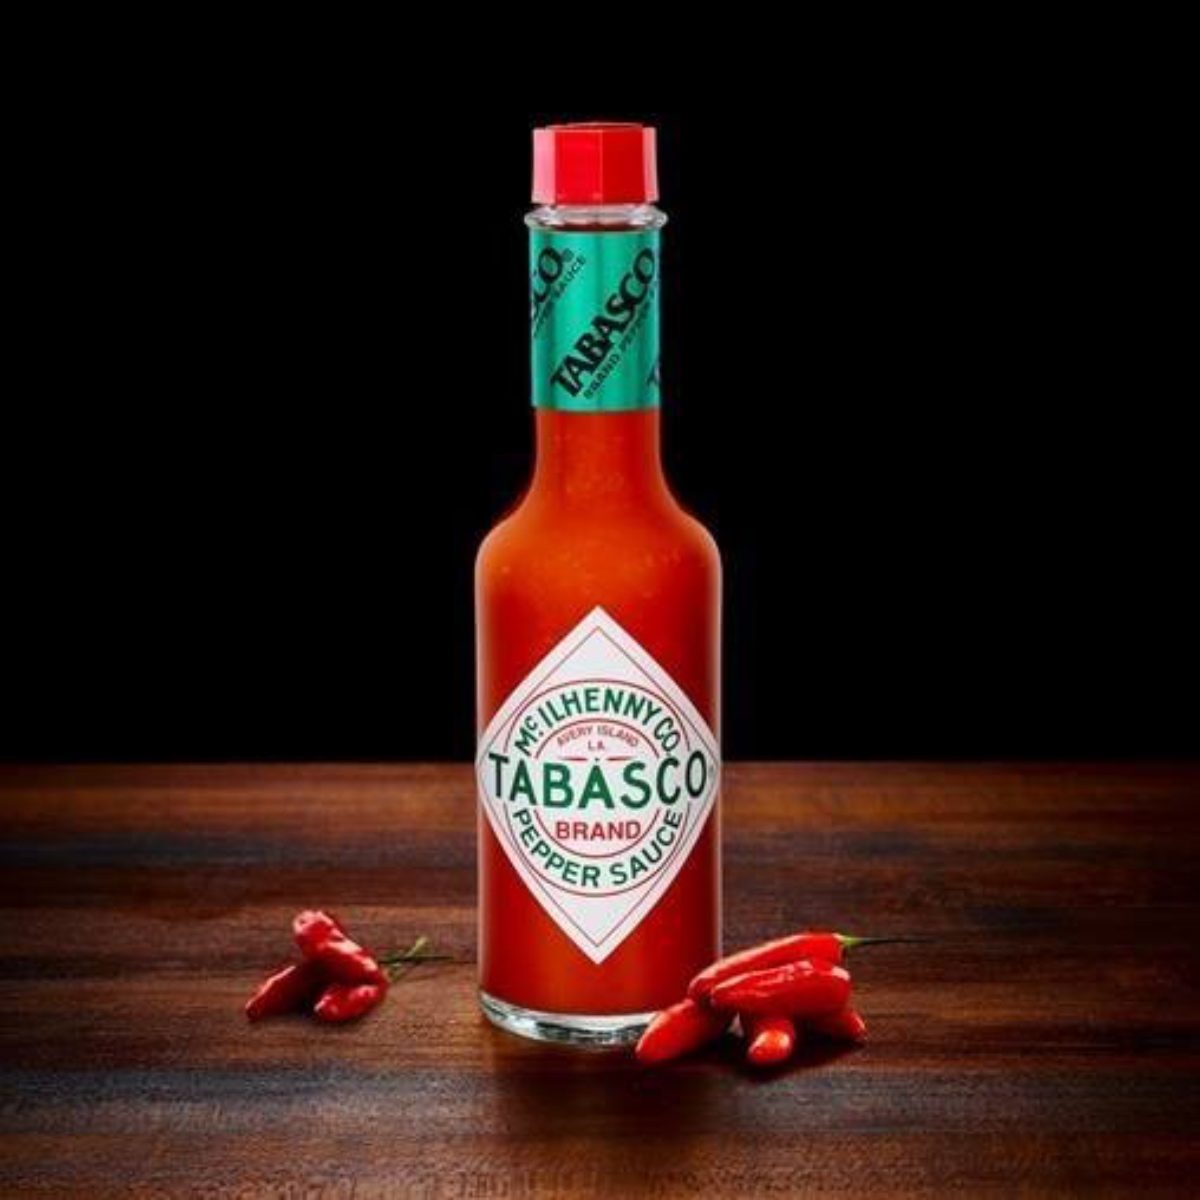 <p class=""><strong><a class="SWhtmlLink" href="https://www.tabasco.com" rel="noopener">Tabasco</a>, Avery Island</strong></p> <p>Little has changed about this famous oak-aged hot sauce since the 1800s. Every seed originates from Avery Island, and every single pepper is still hand-picked. Even the salt used to mash the peppers comes from the island!</p>